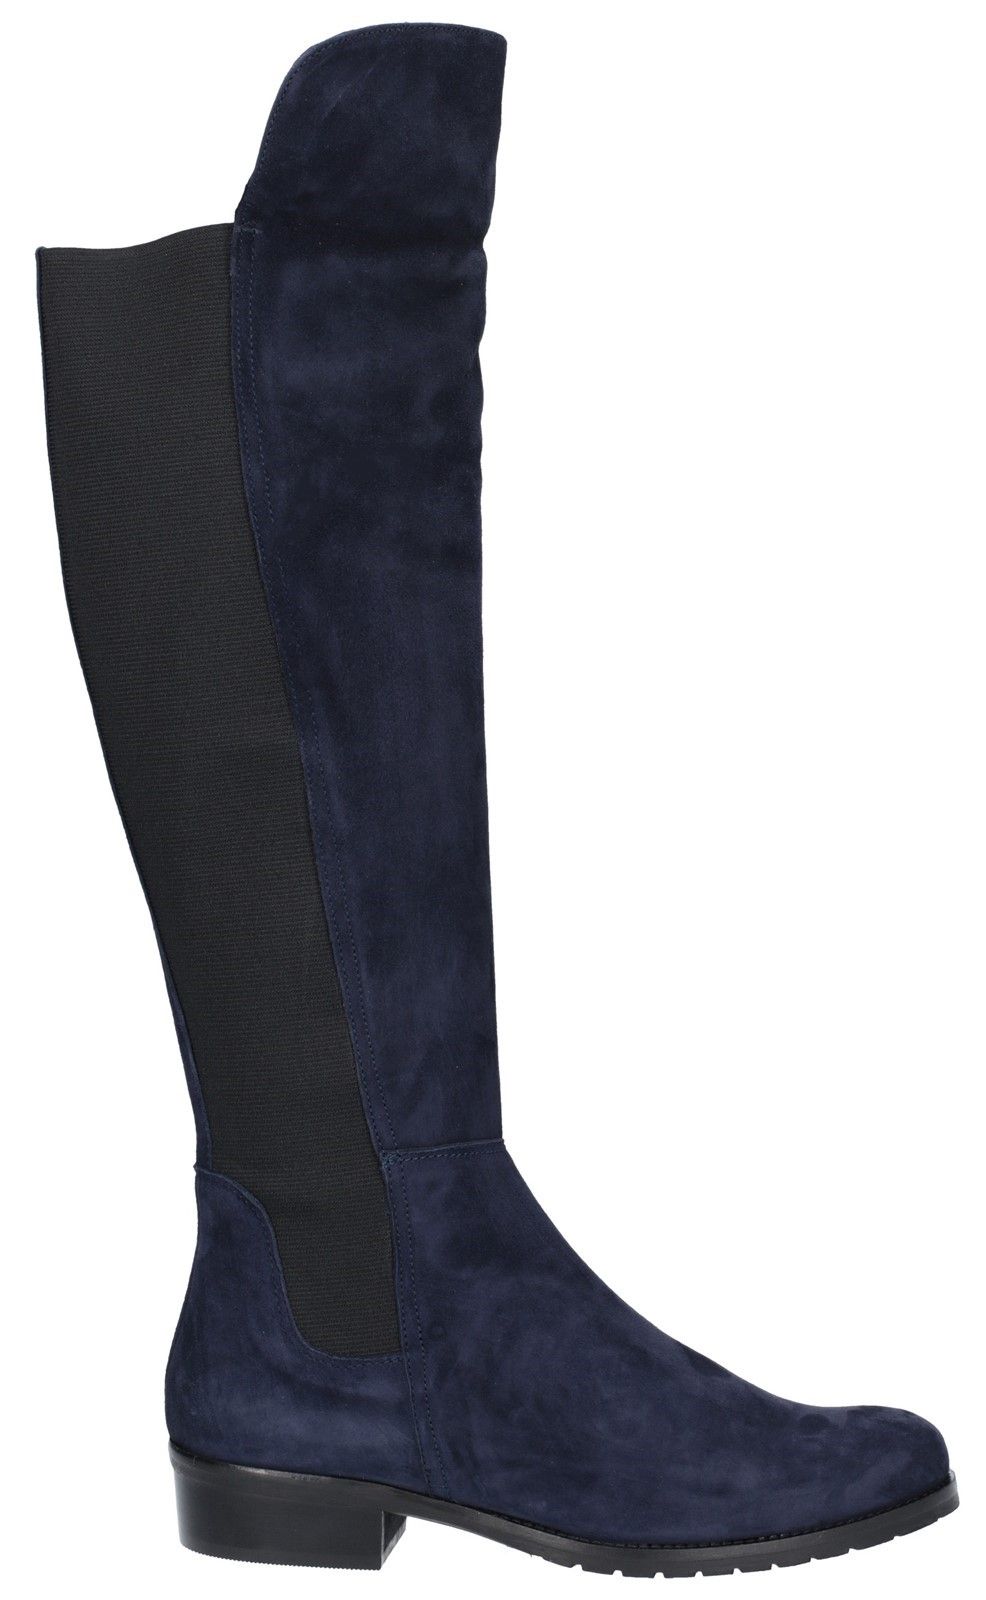 Ladies knee high suede leather boots with full length elastic panel for comfort.Ladies' knee high suede leather pull up boots. 
Soft suede leather upper. 
Full length elasticated comfort panel. 
Contoured heel stiffener. 
Comfortable rounded toe.